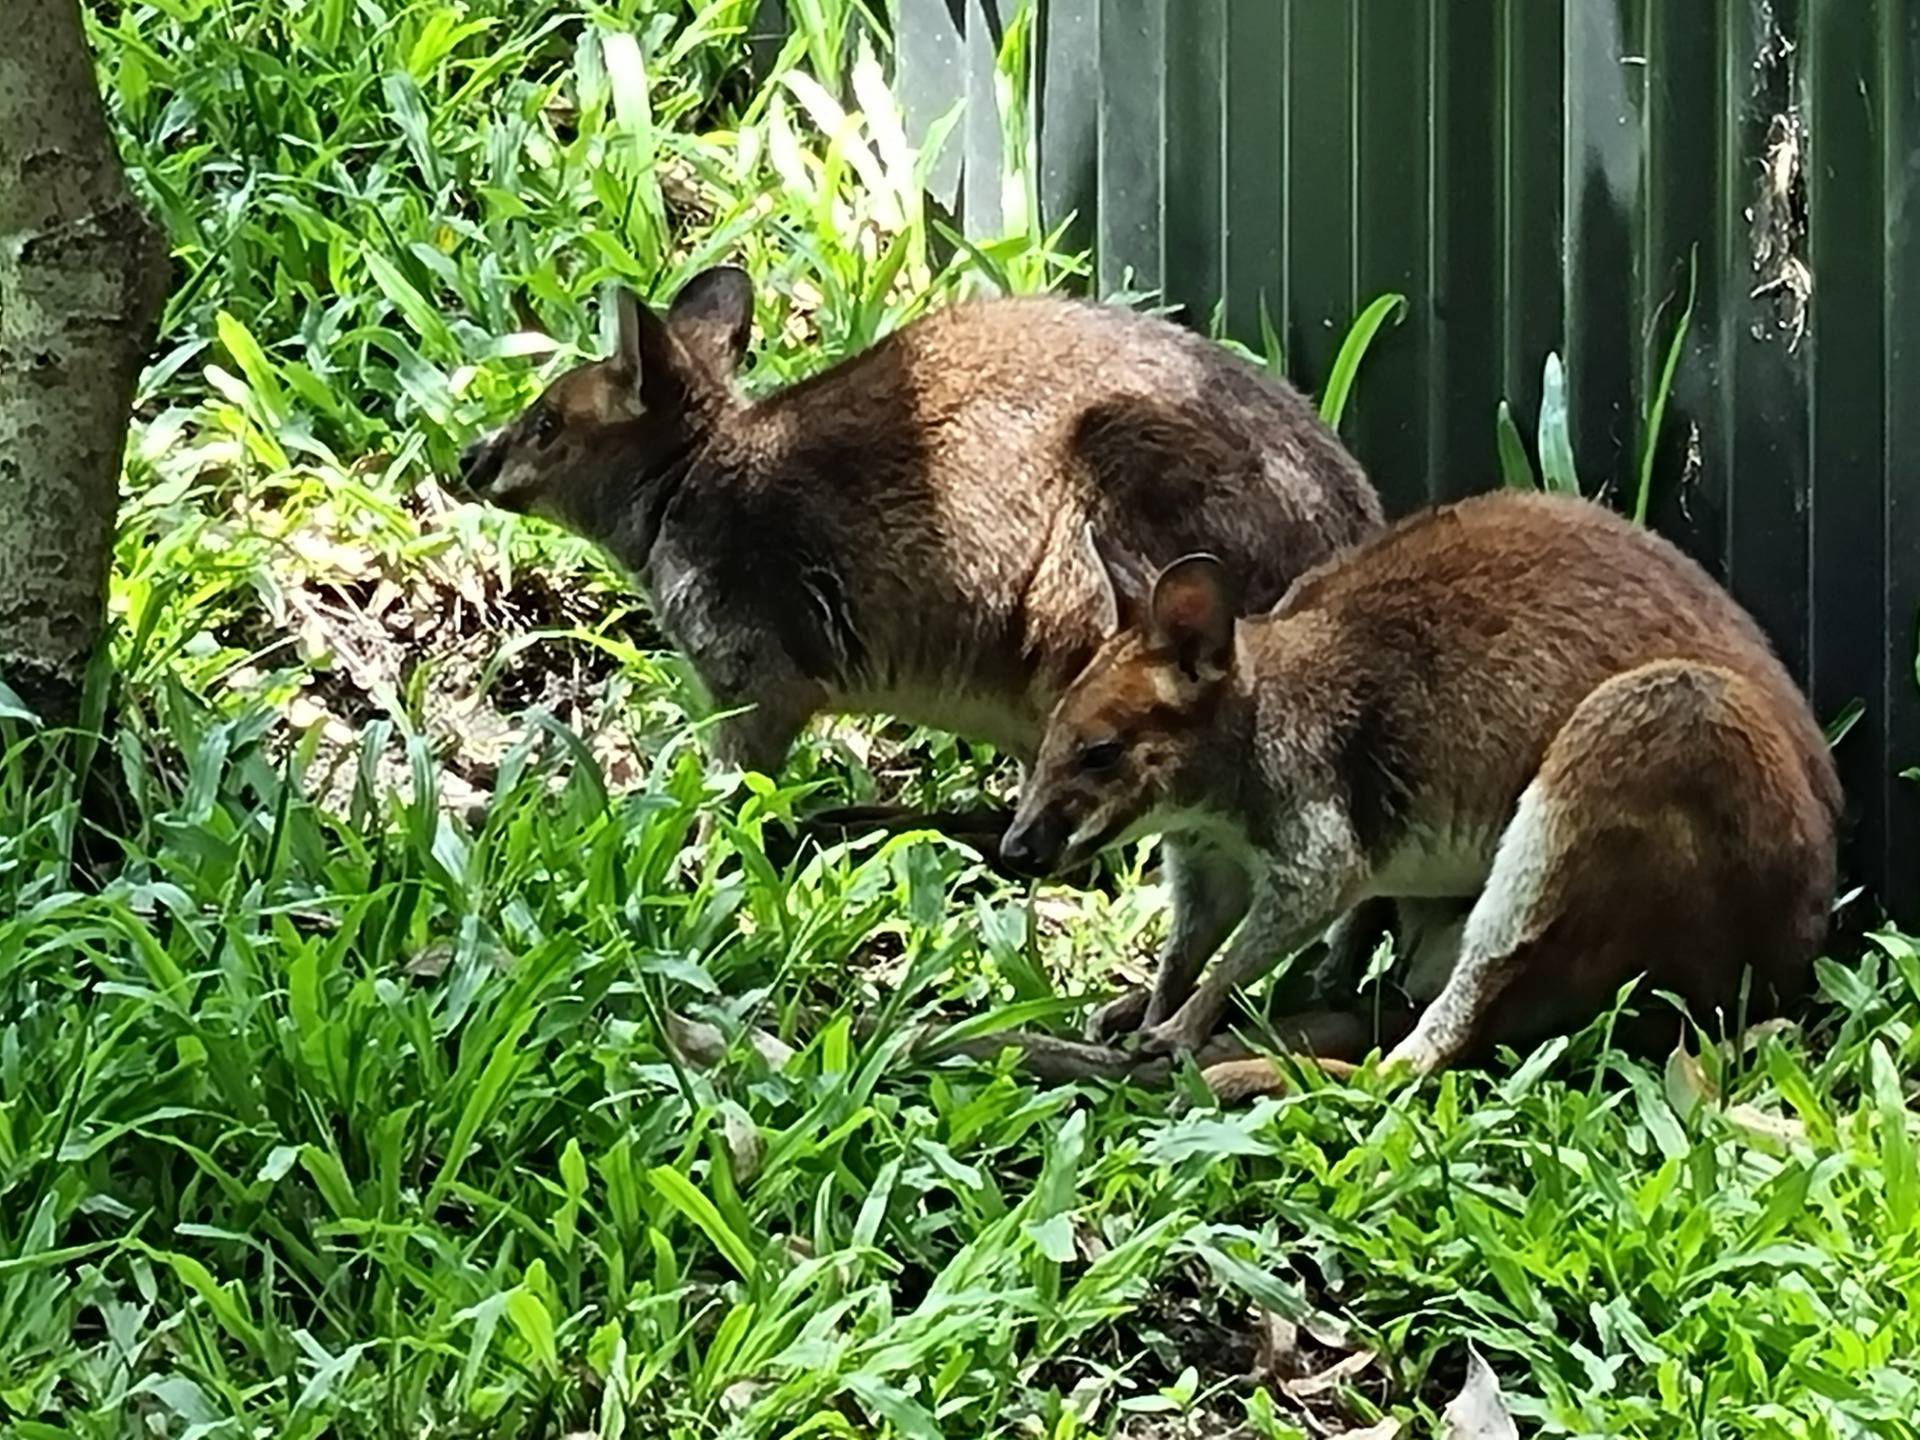 The Red-legged Pademelon was the next animal we saw. They have an unusual way of sitting compared to other types of macropods (kangaroos, wallabies, pademelons, etc).